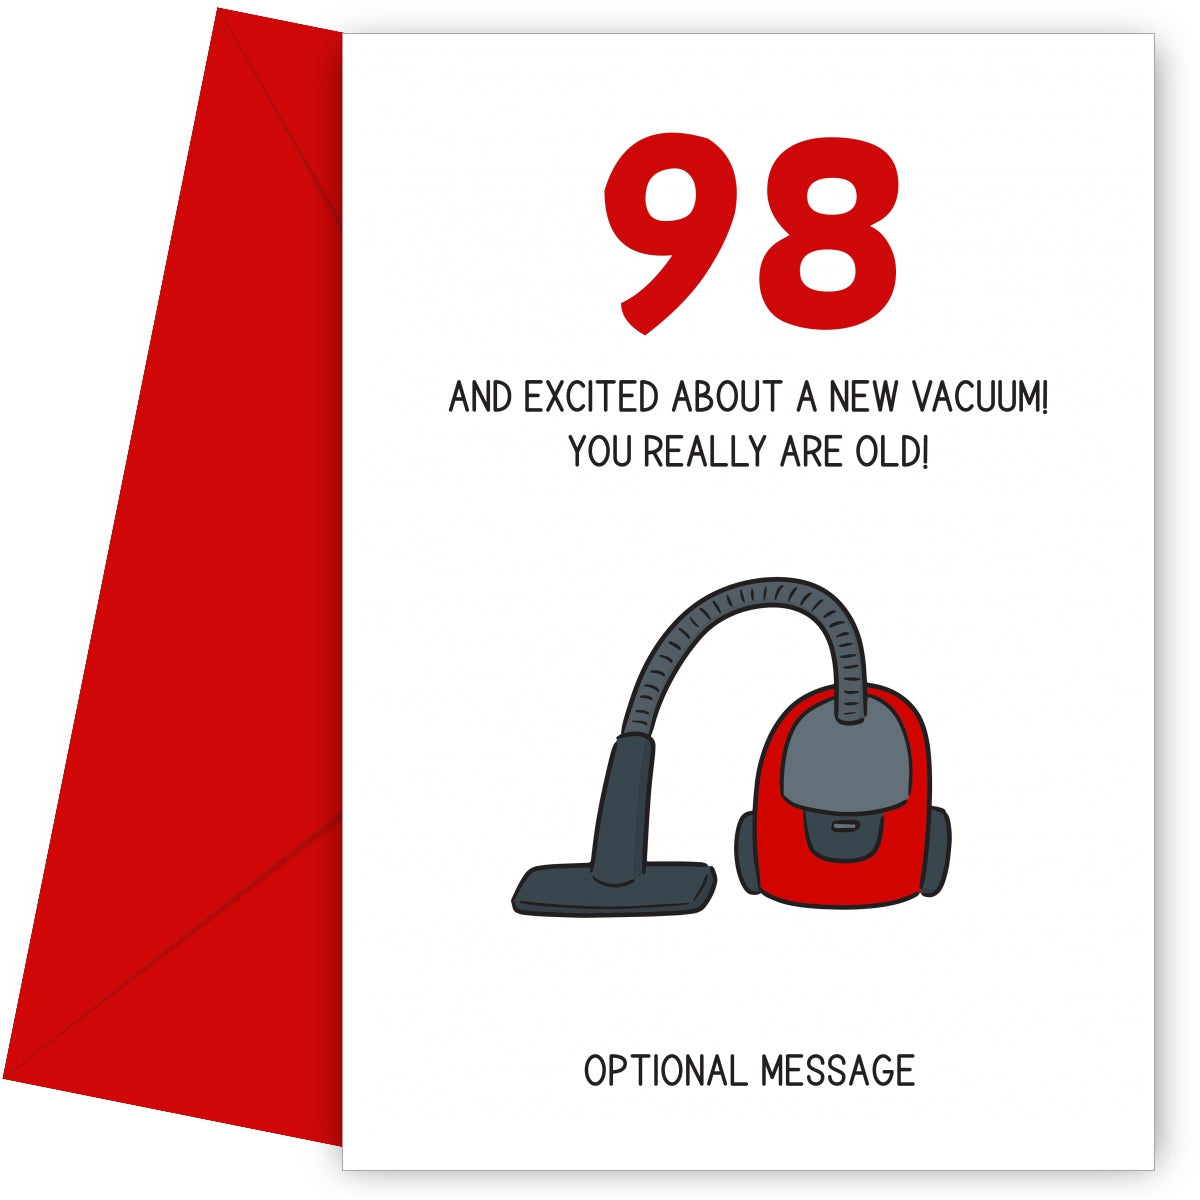 Happy 98th Birthday Card - Excited About a New Vacuum!